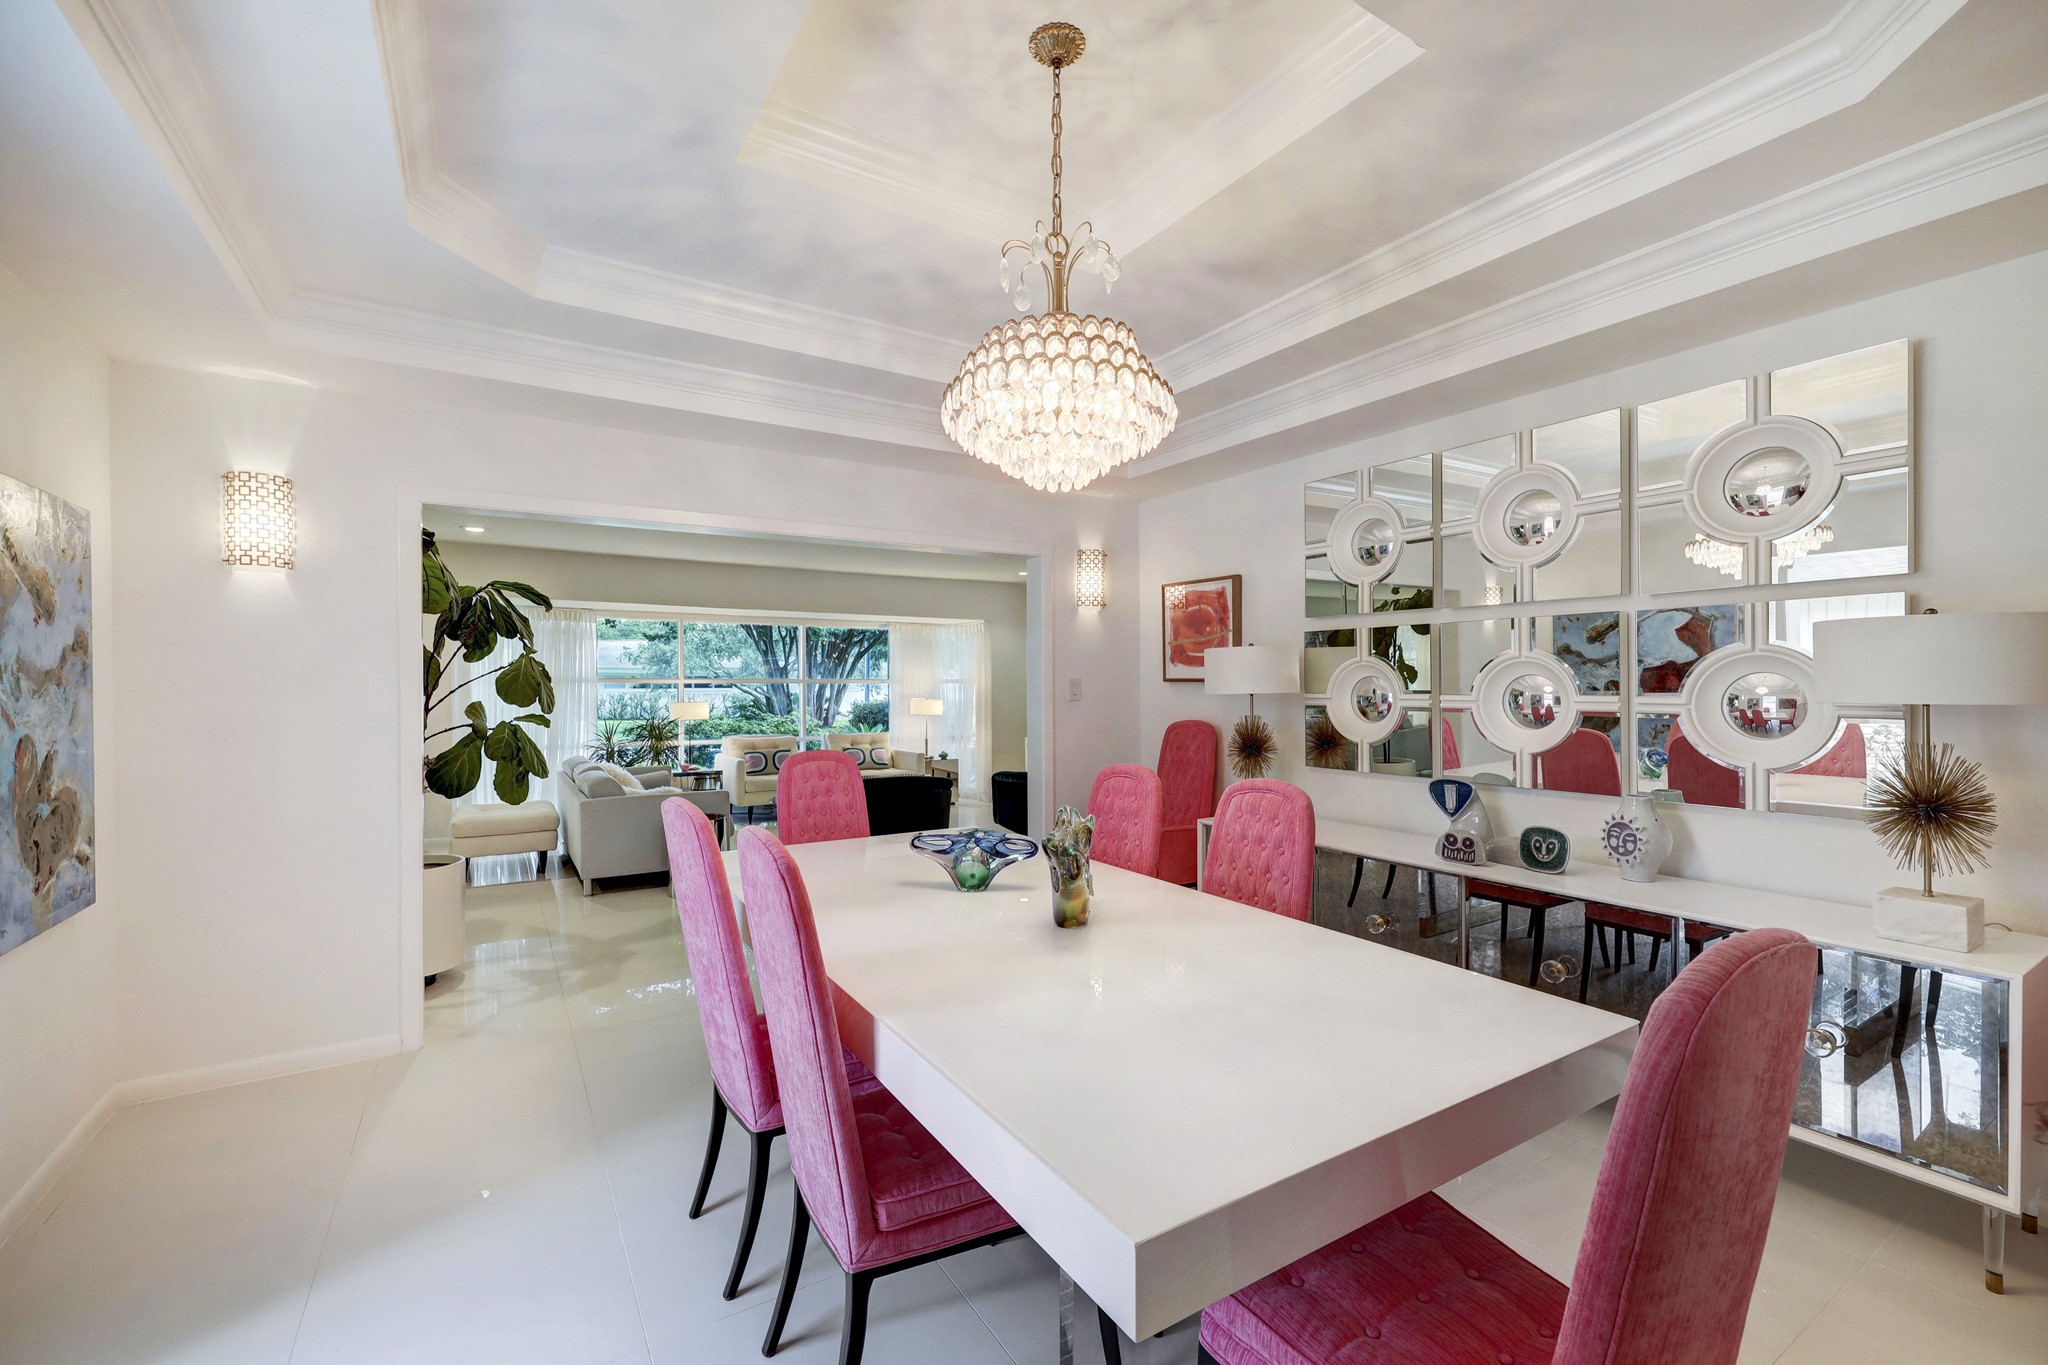 Spacious dining room can accommodate for a large family dining table.